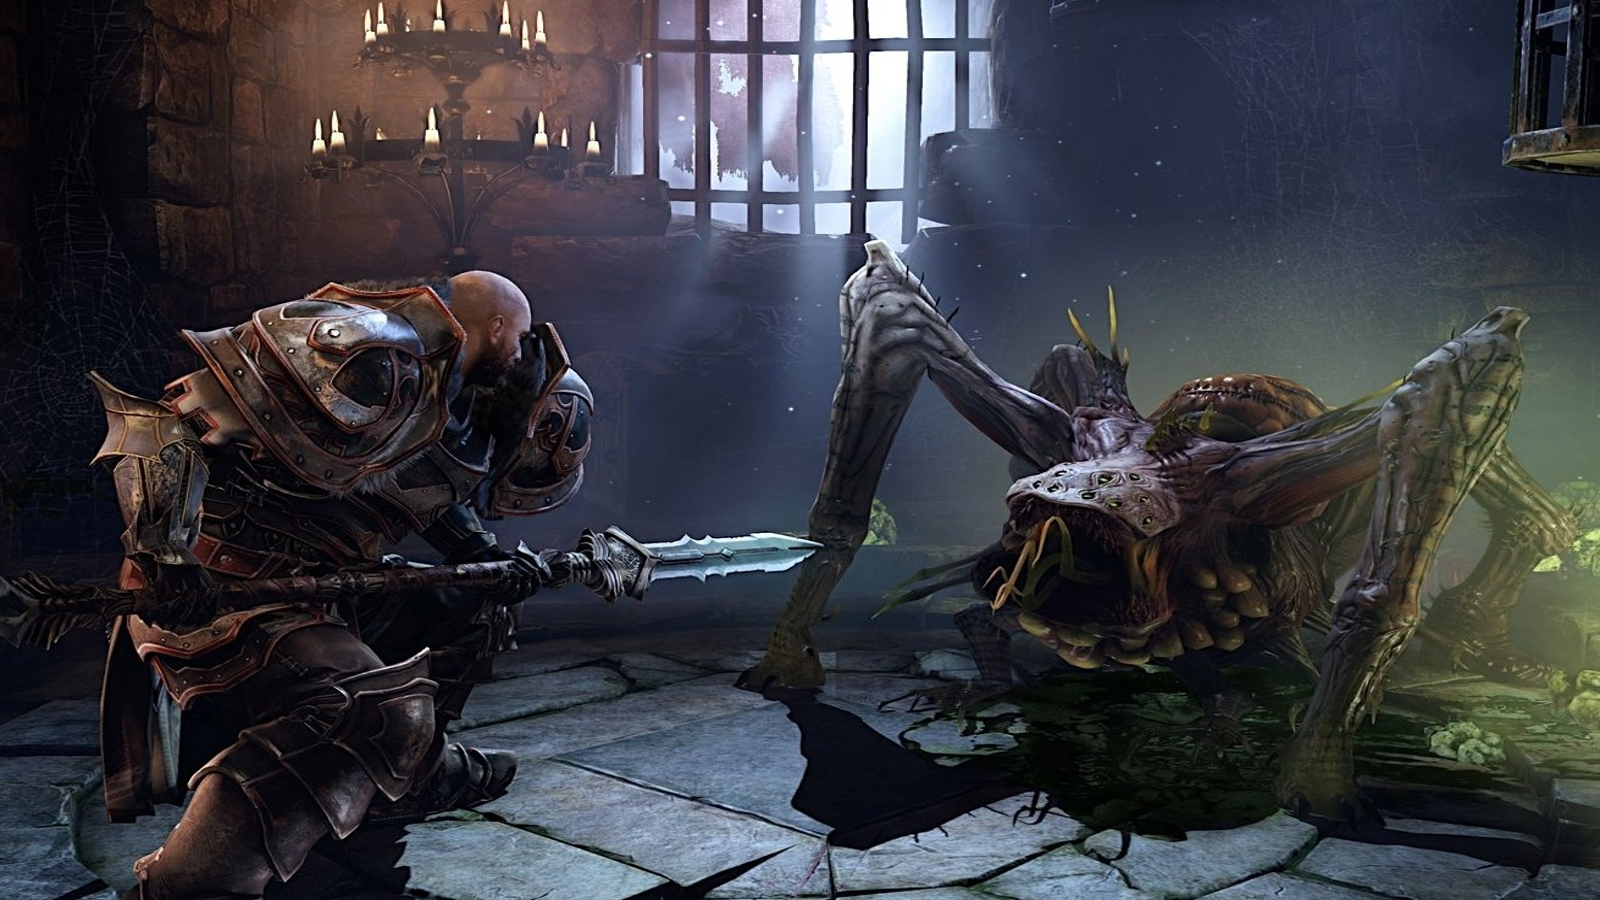 Lords of the Fallen review: doppelganger